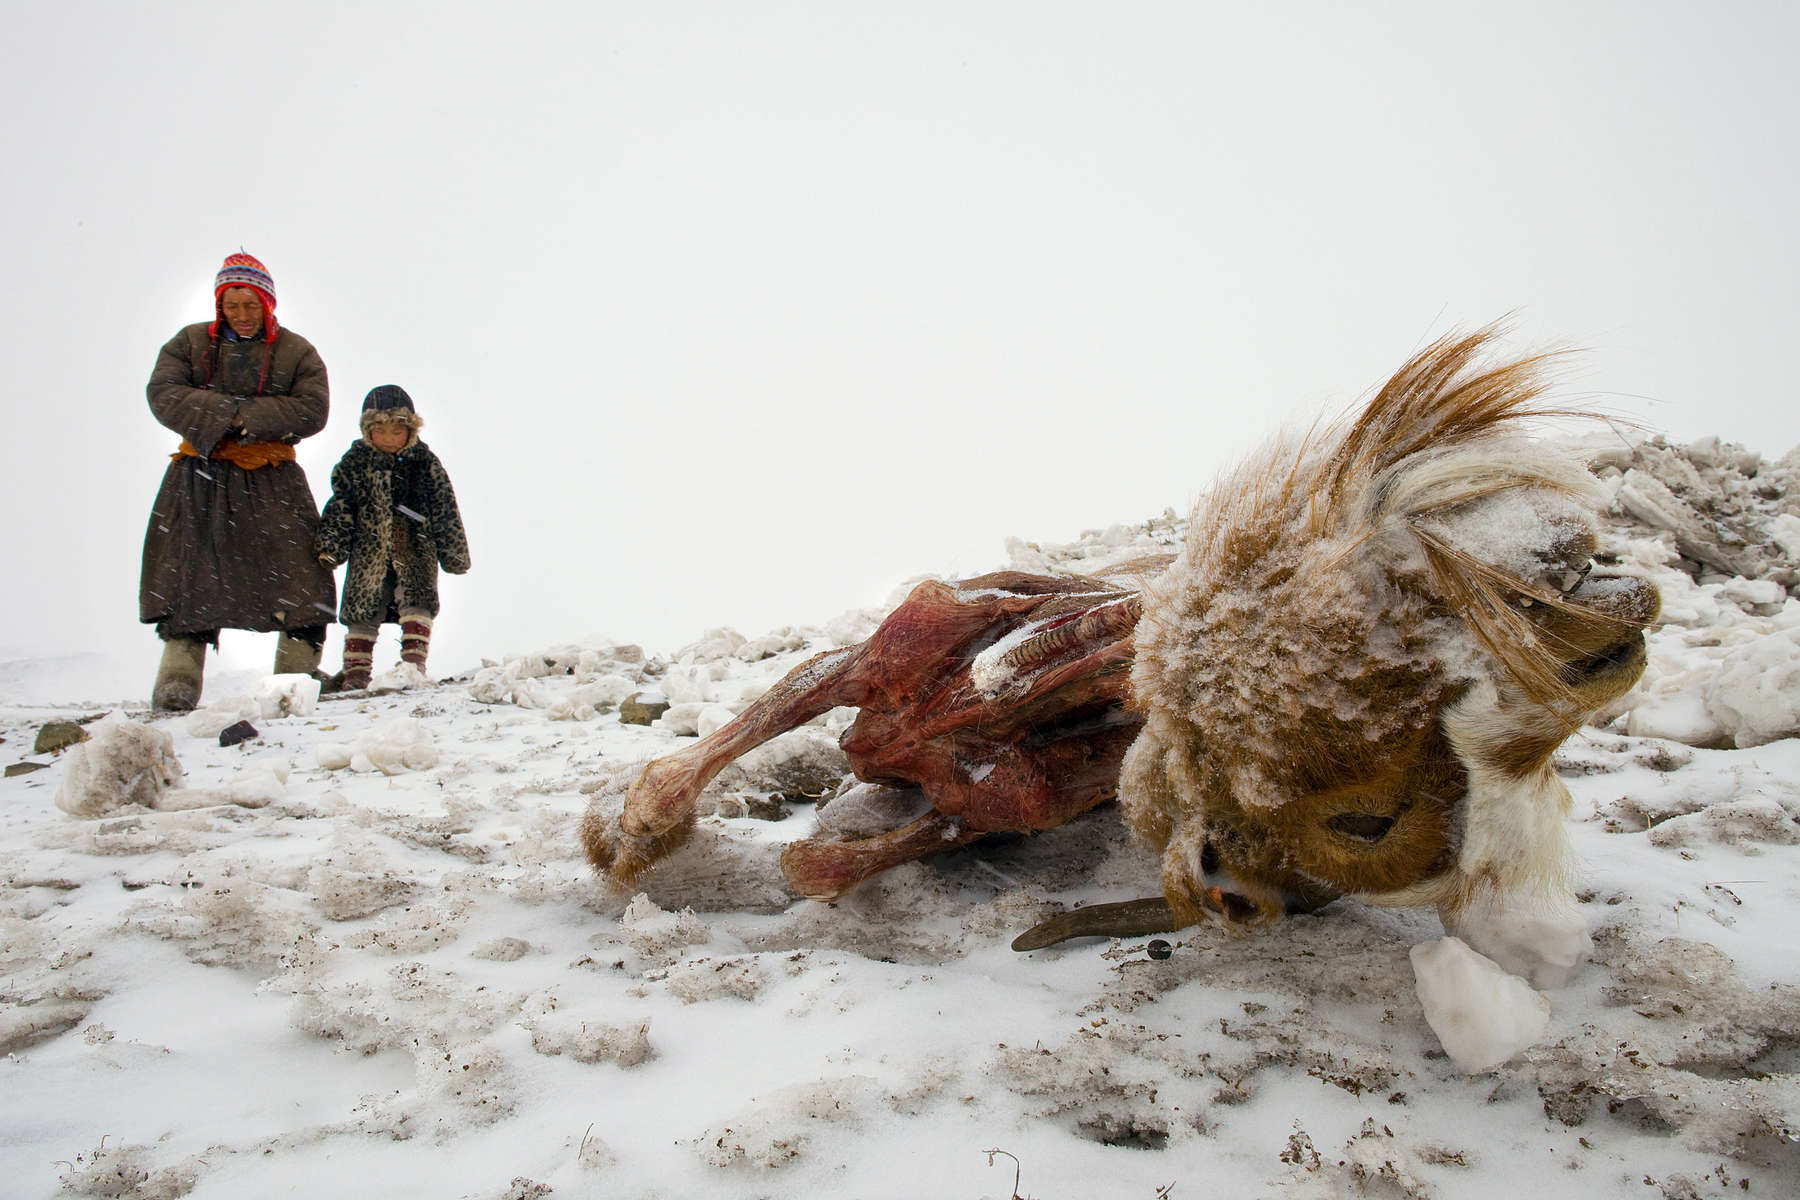 Dealing with another snowstorm, Muukhbayar,50, stands with daughter Javzmaa, age5,  next to their goat that died from starvation in Sergelen, in Tuv province in Mongolia. The family lost  200 of their herd from 500, the family said that many herder nomadic families moved due to the severe cold and snow. Mongolia is still experiencing one of the worst Winters in 30 years with 68 % of the provinces effected. Presently the government has declared an emergency requiring foreign aid to alleviate the impact of the {quote} Zud{quote} ( Mongolian term for a multiple natural disaster) caused by bitter cold and thick snow.